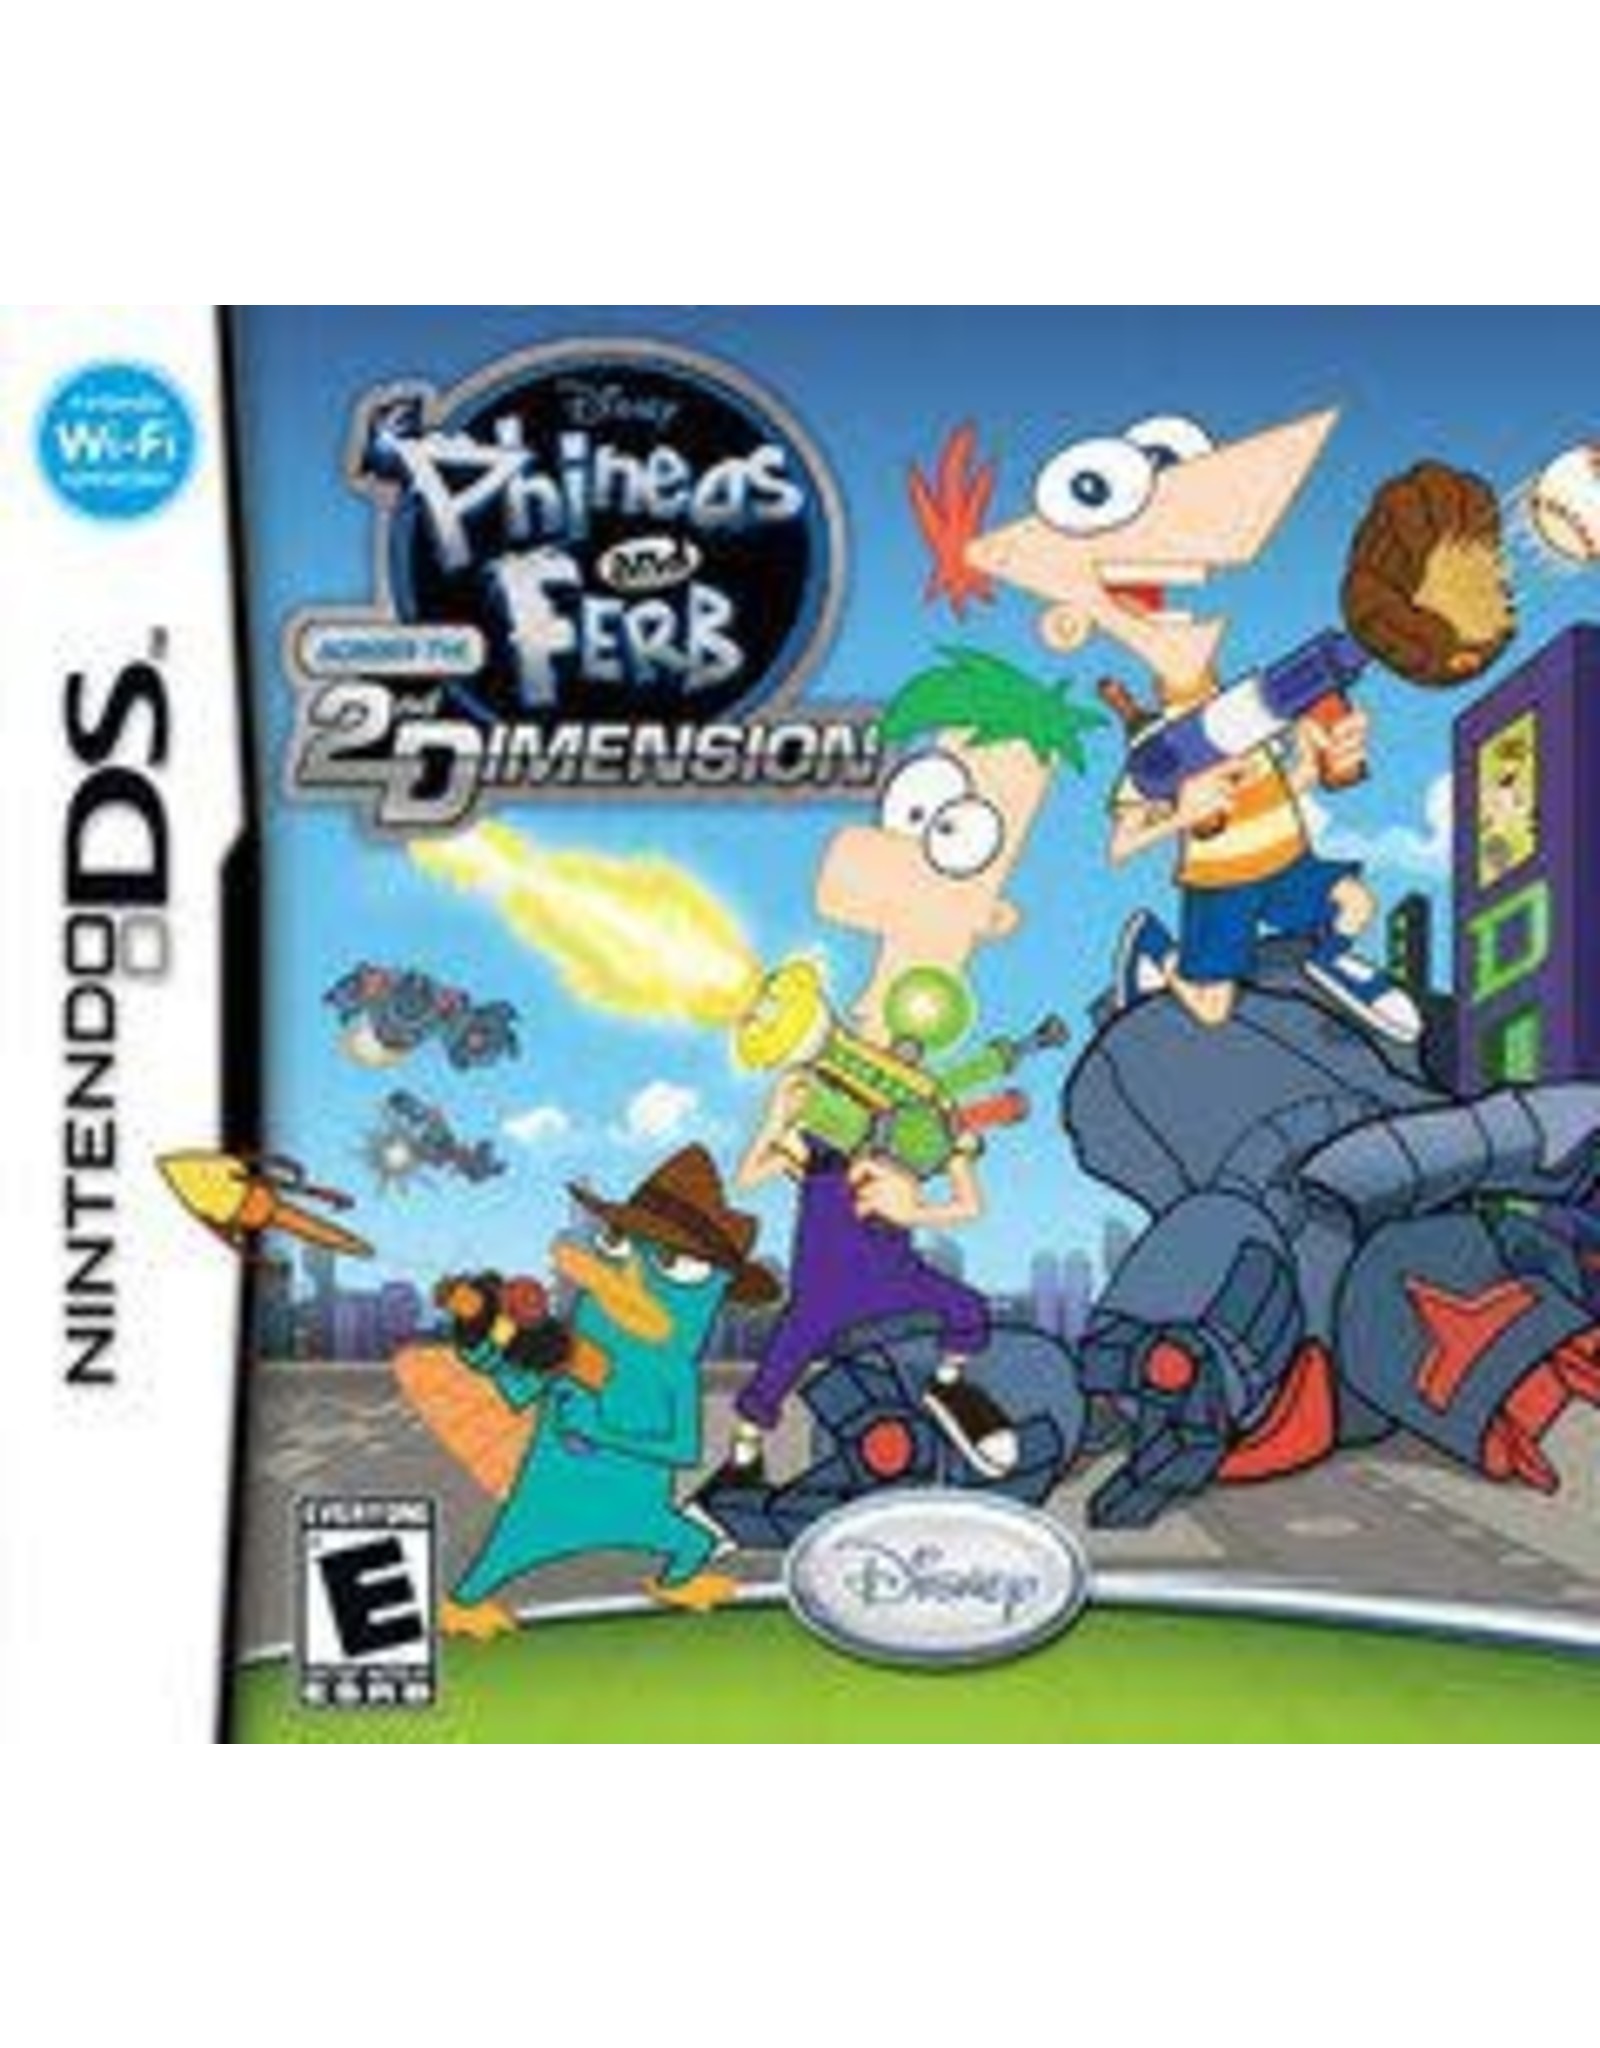 Nintendo DS Phineas and Ferb: Across the 2nd Dimension (CiB)